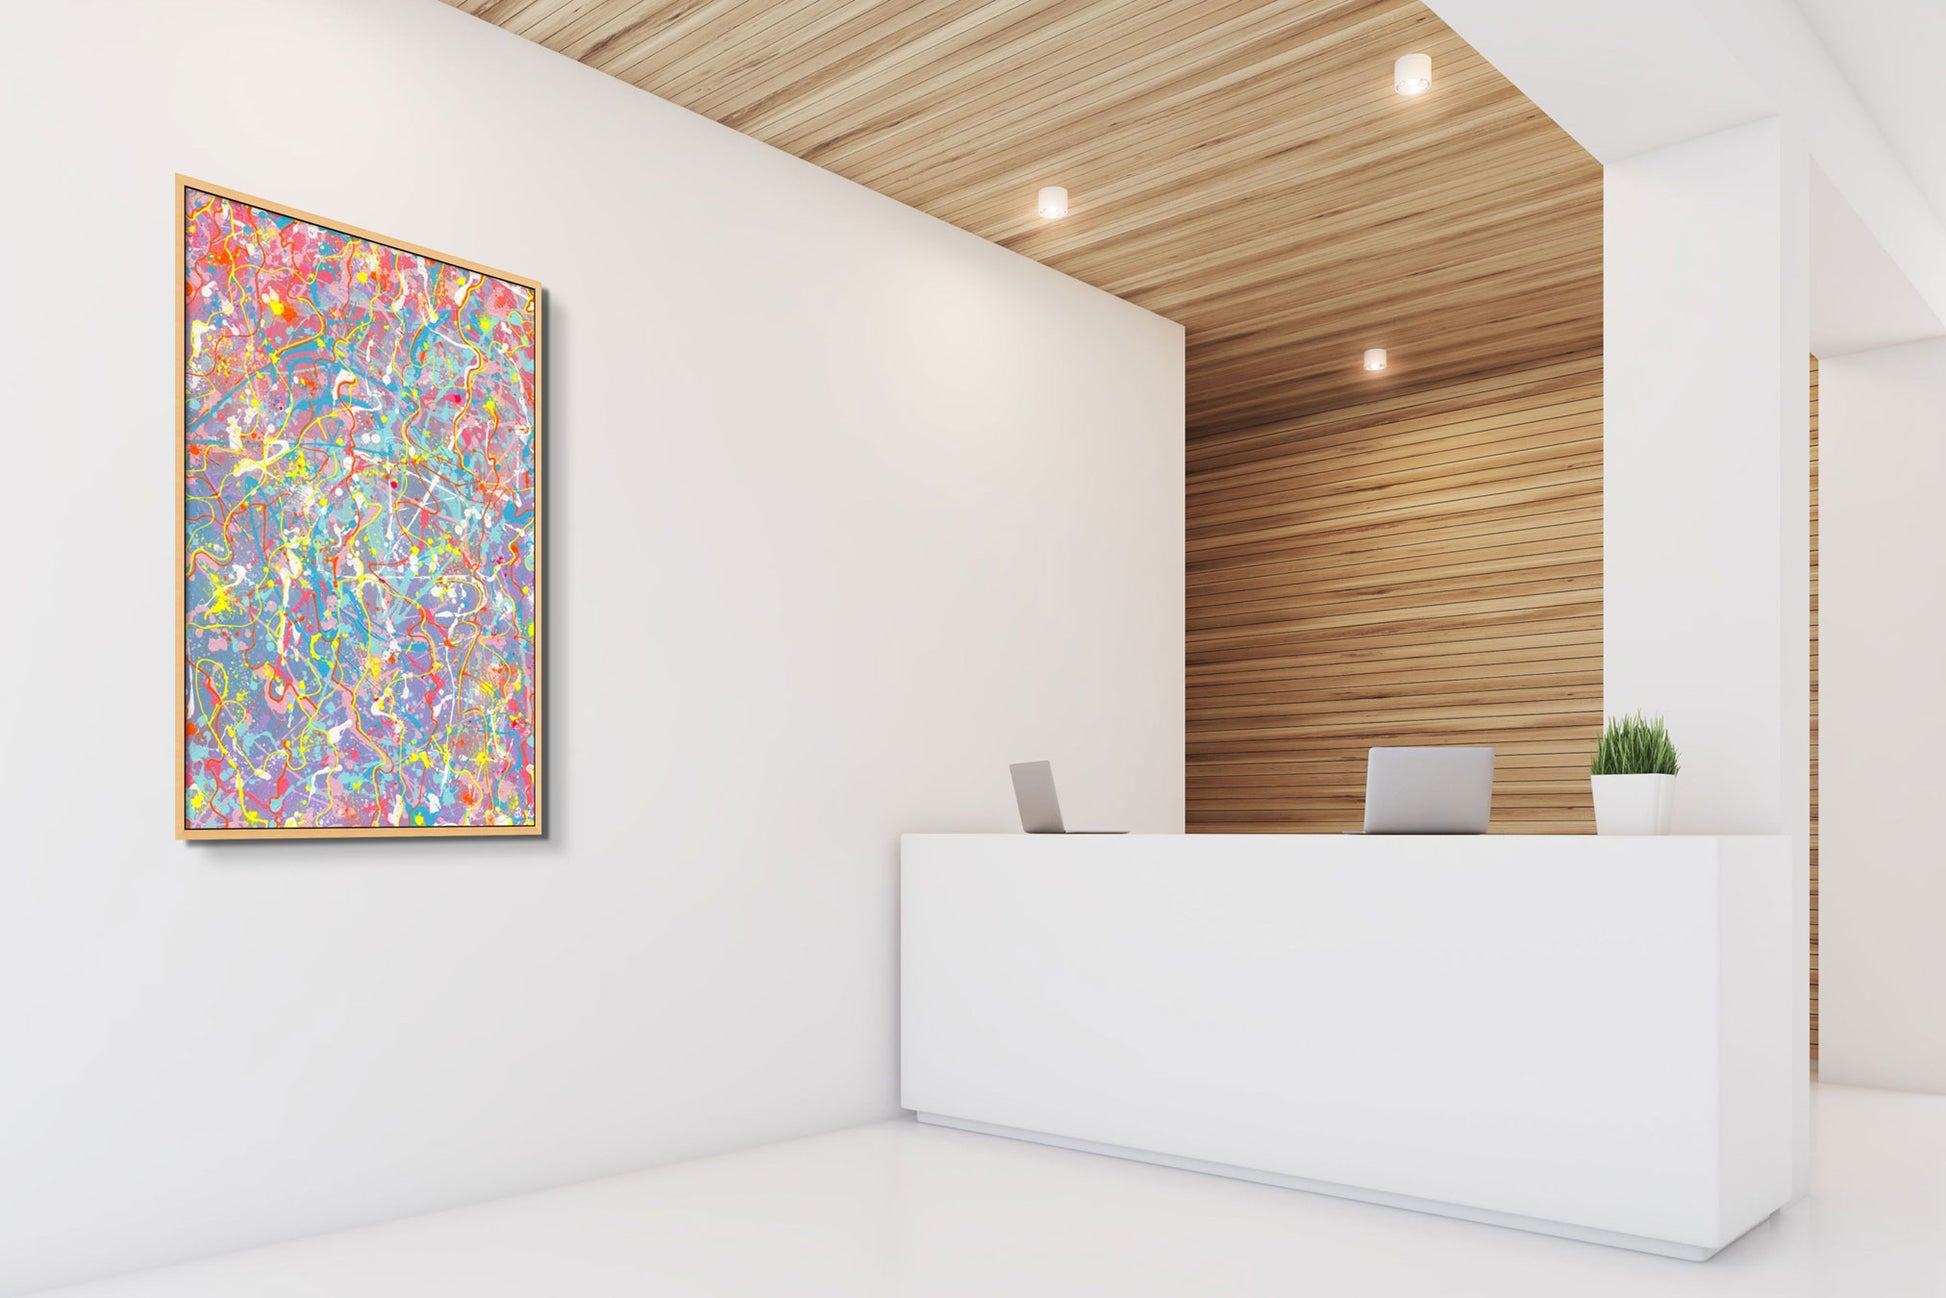 'Truth' Large, Canvas Fine Art print, framed in oak seen hanging in modern boutique hotel lobby. After the original abstract painting by Bridget Bradley